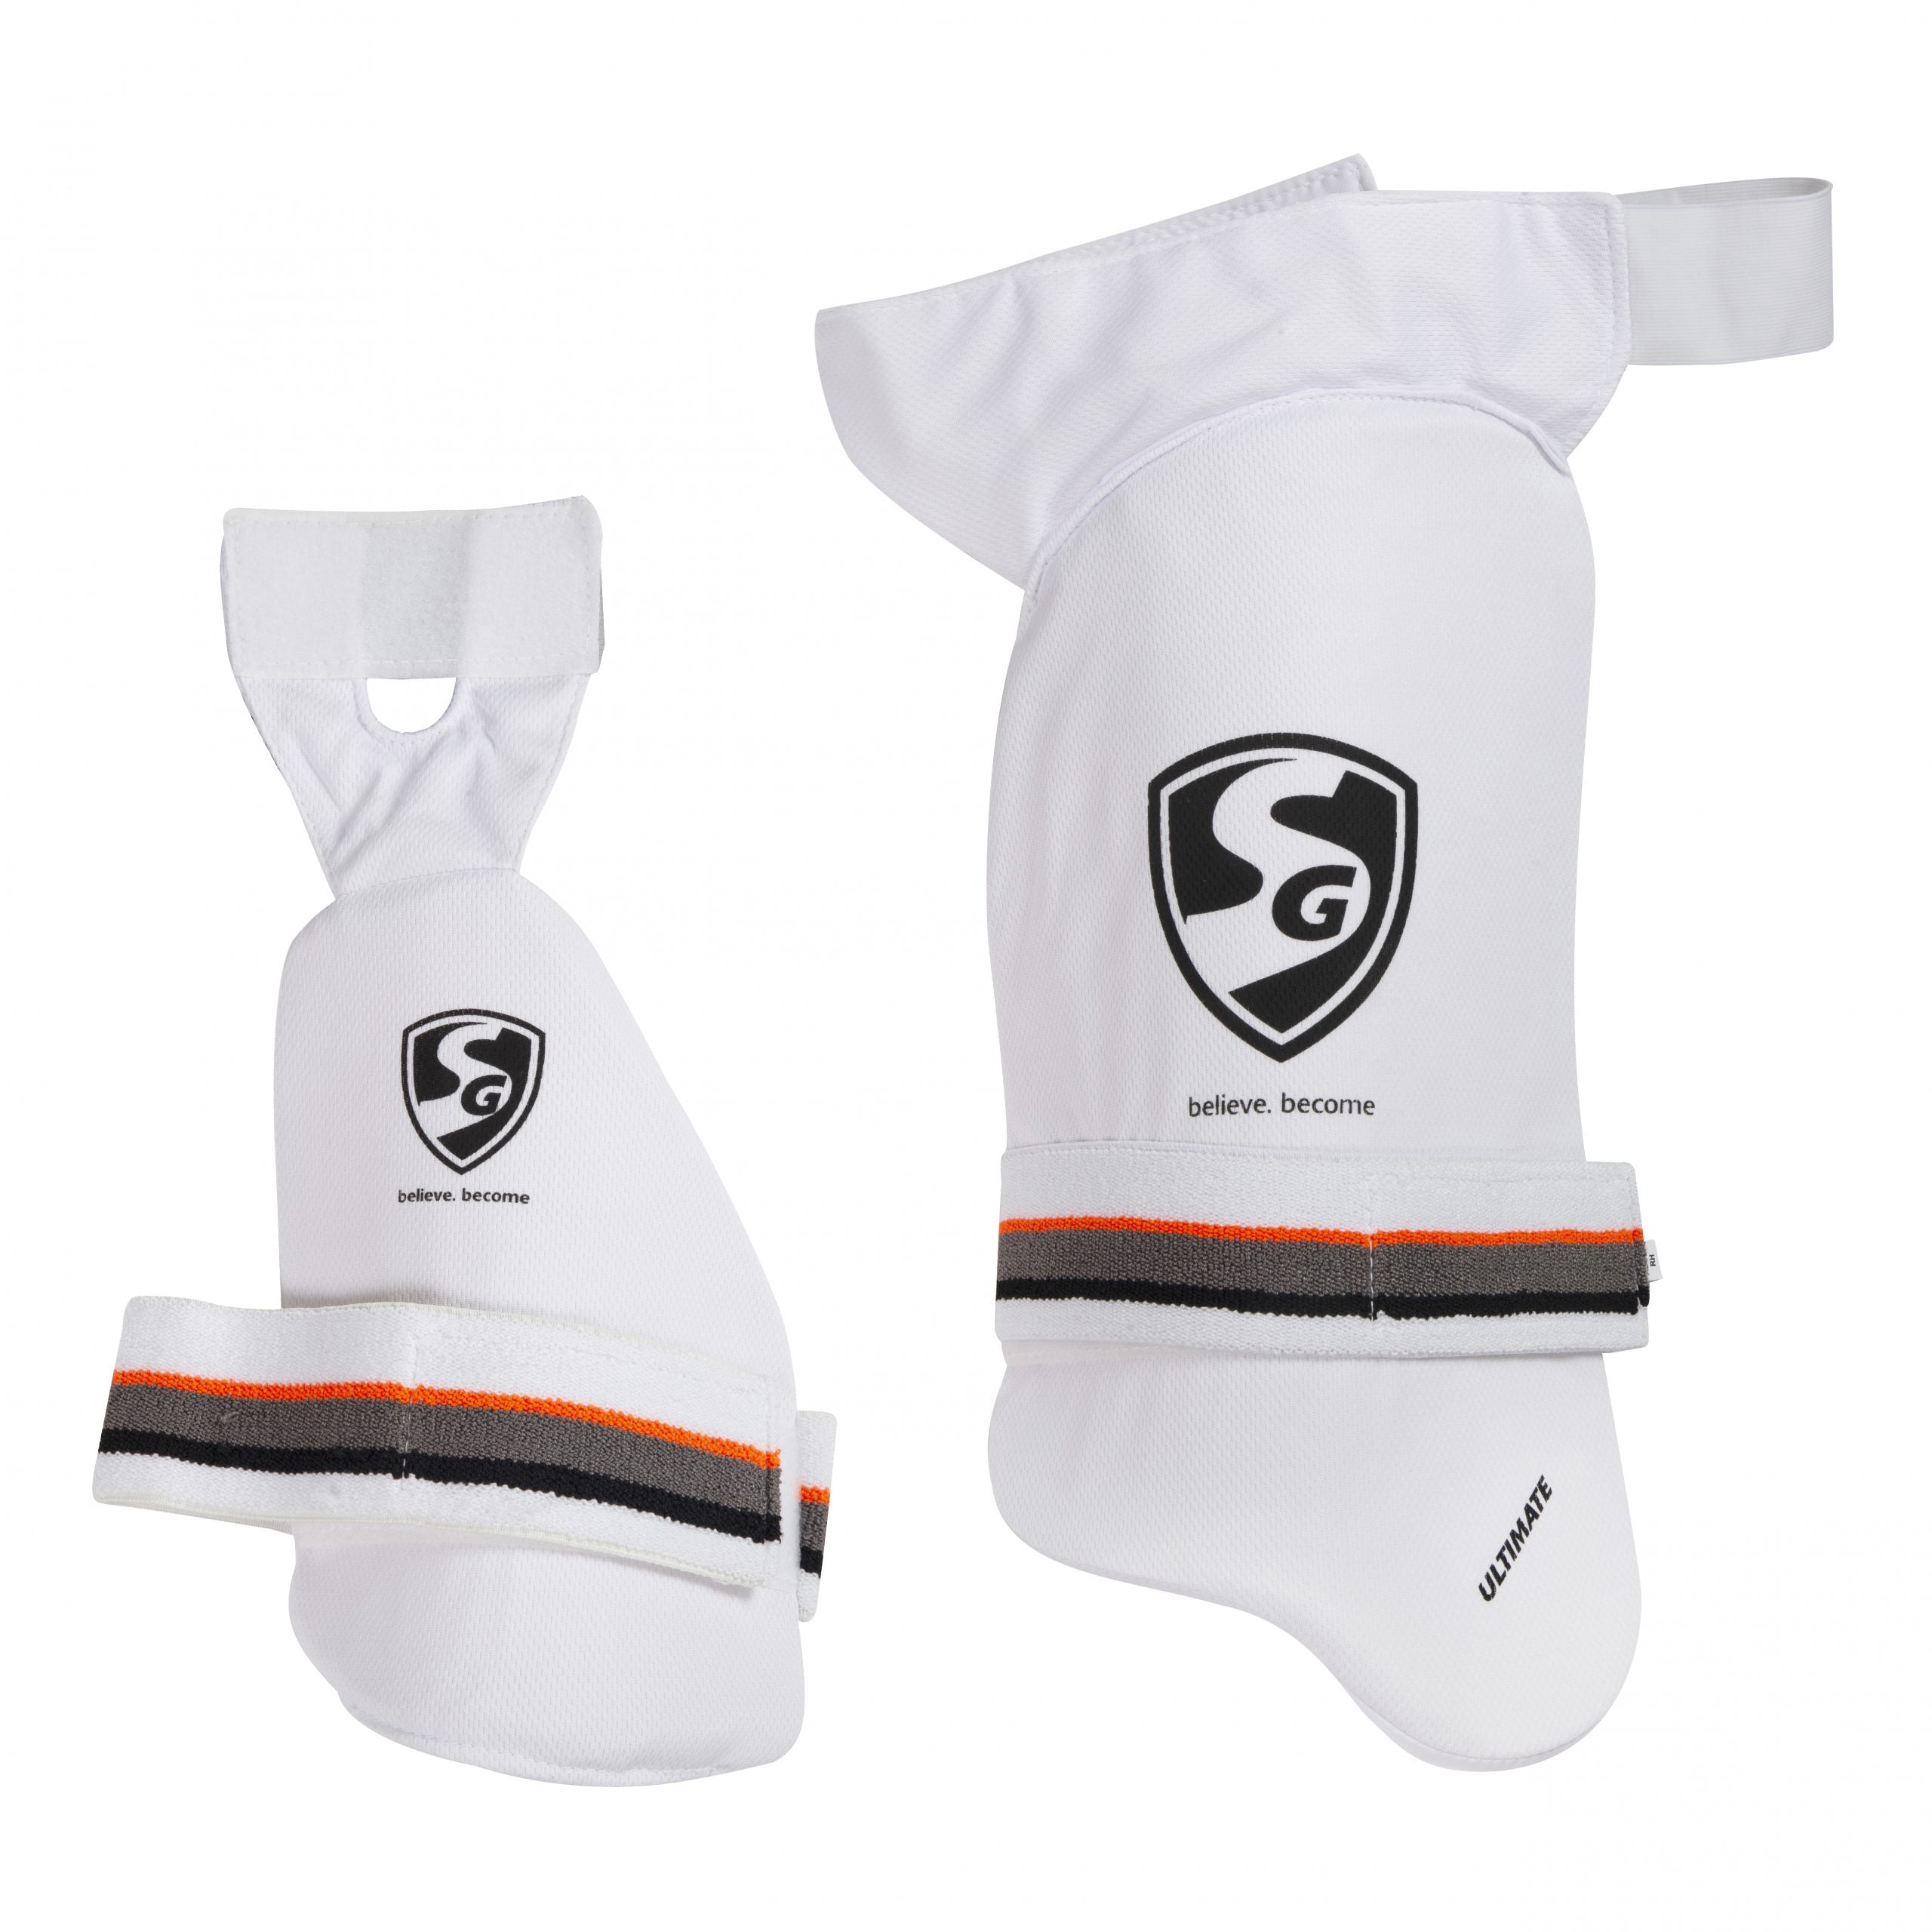 Ultimate Combo Thigh pad - SG